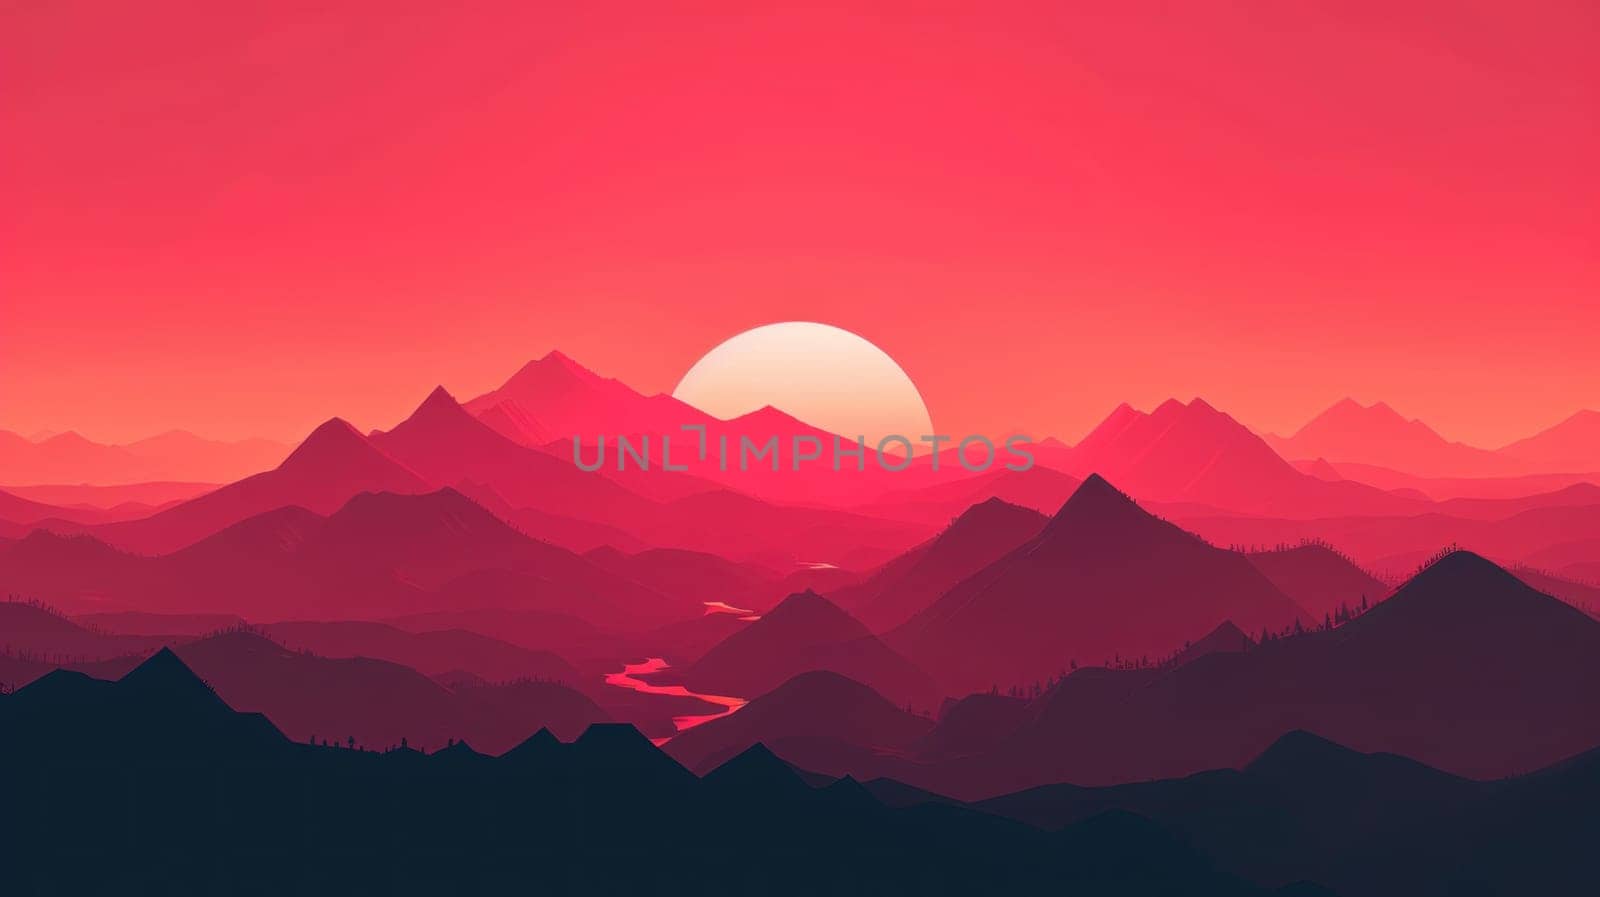 A mountain range with a red sun in the sky.